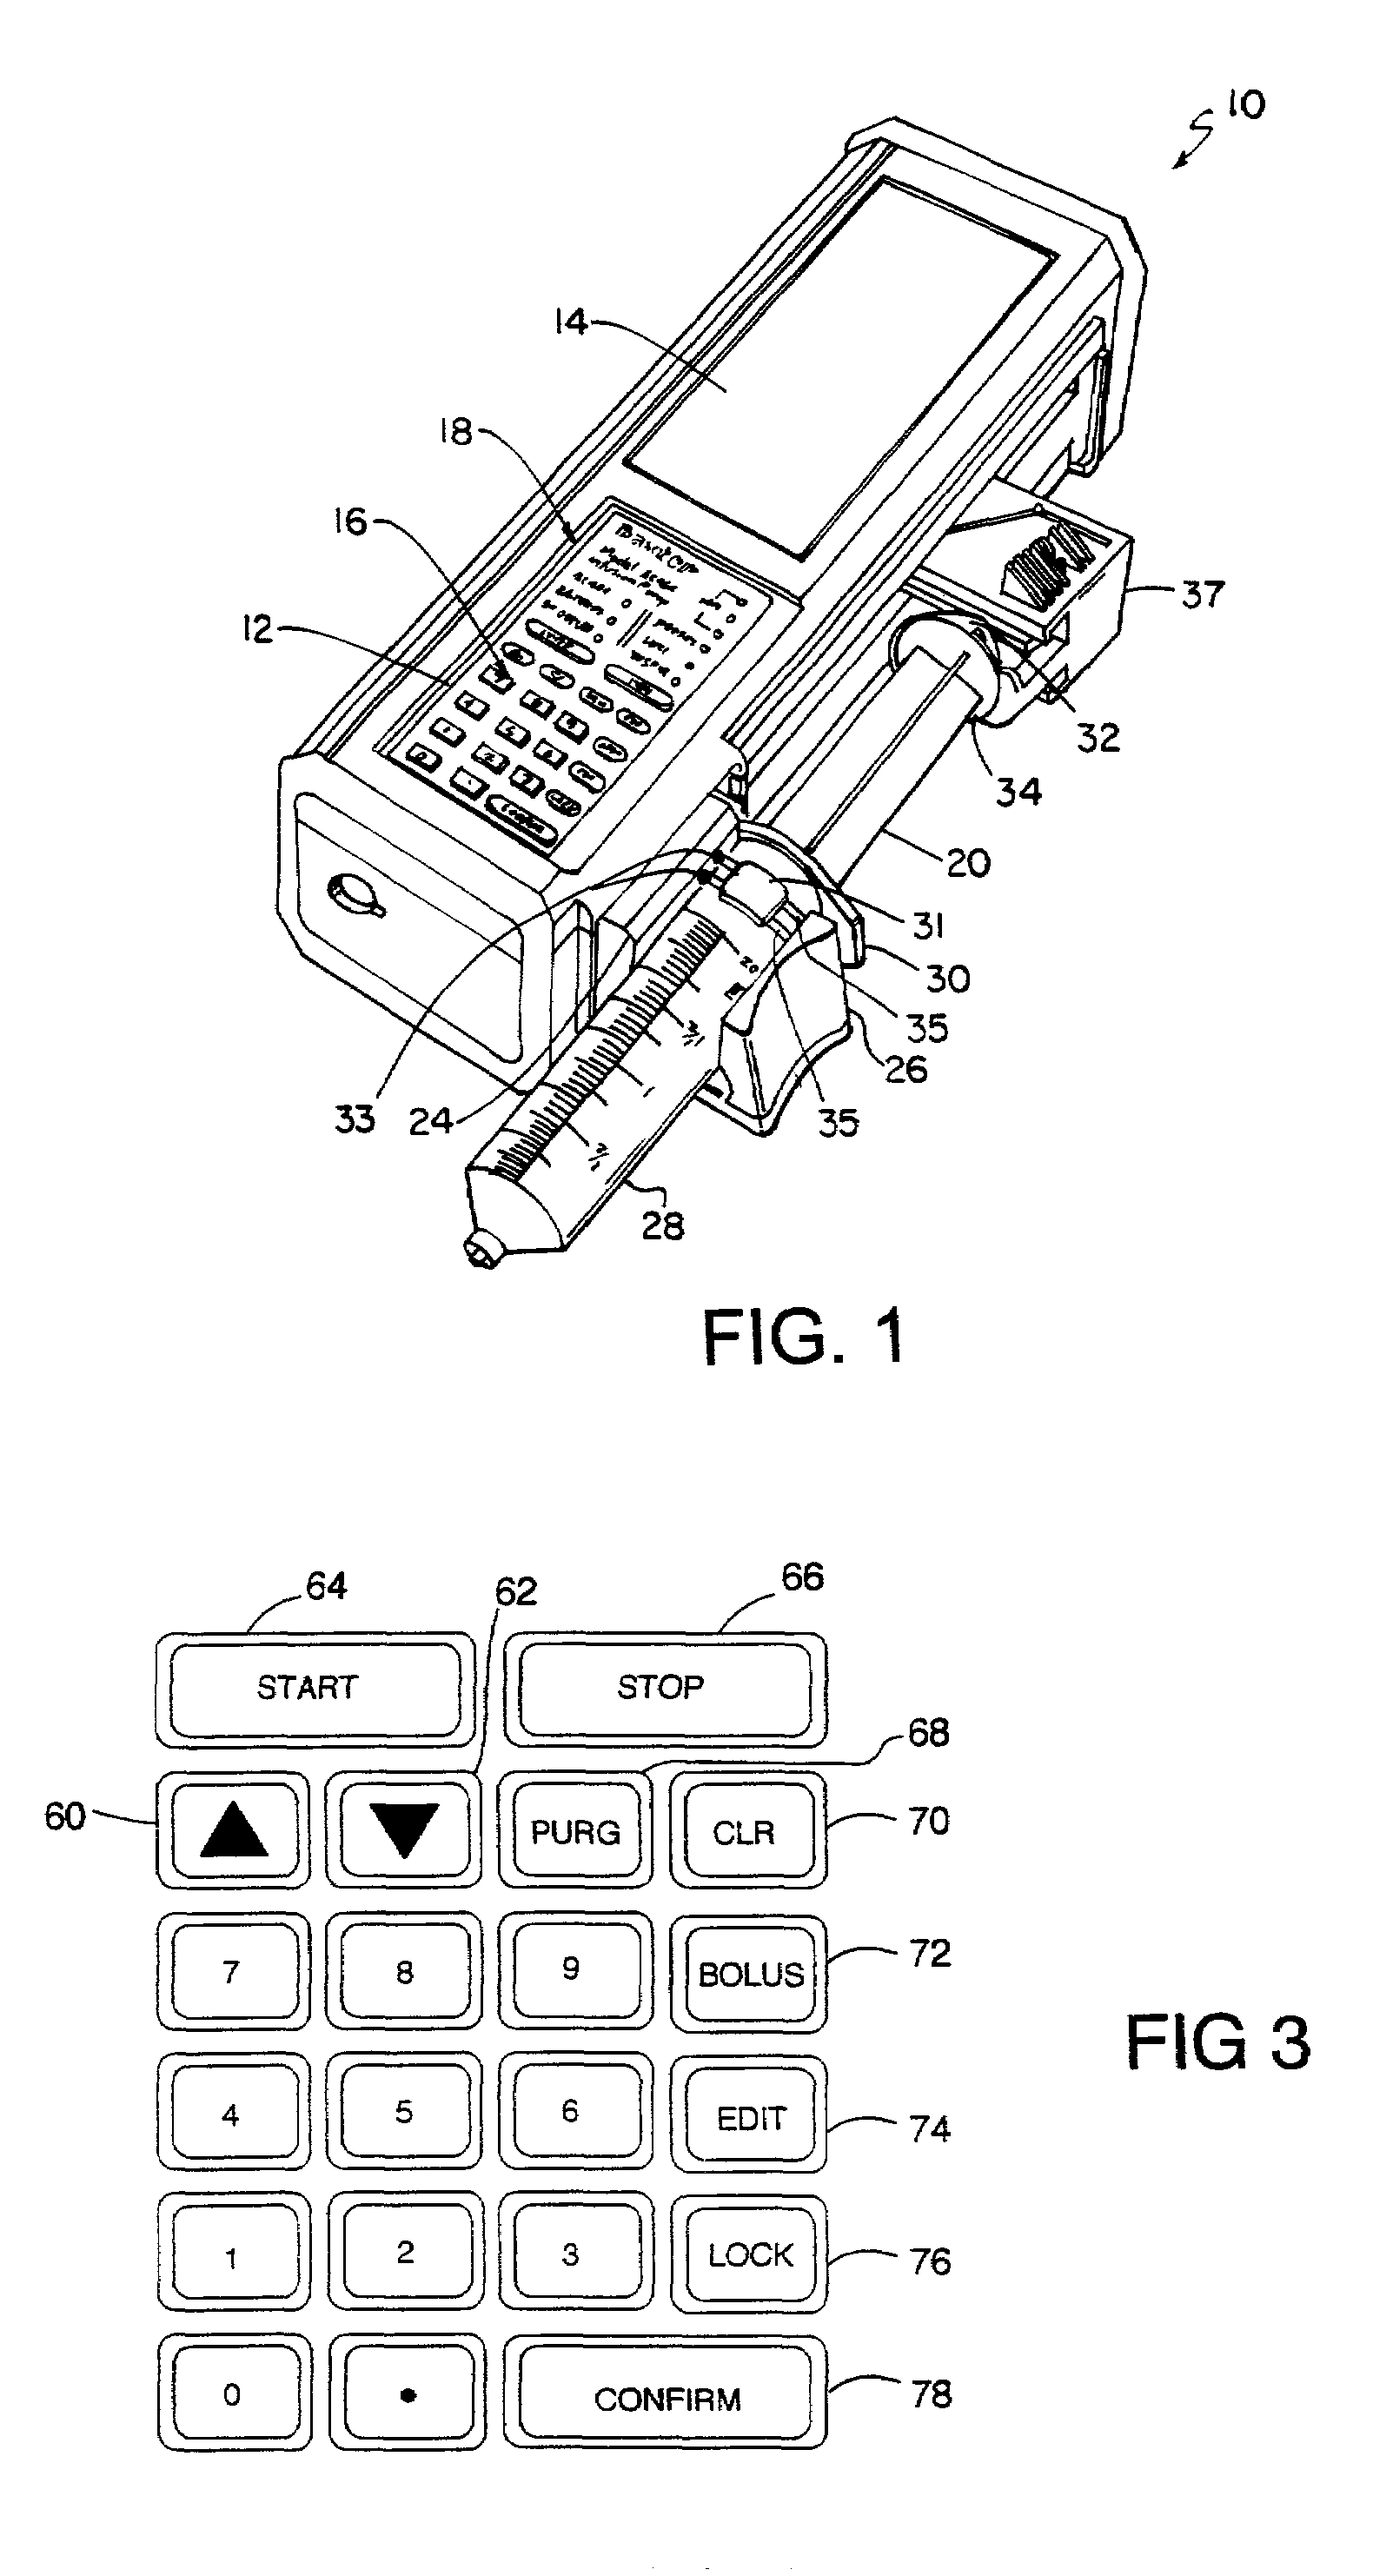 Infusion pump with an electronically loadable drug library and label reader